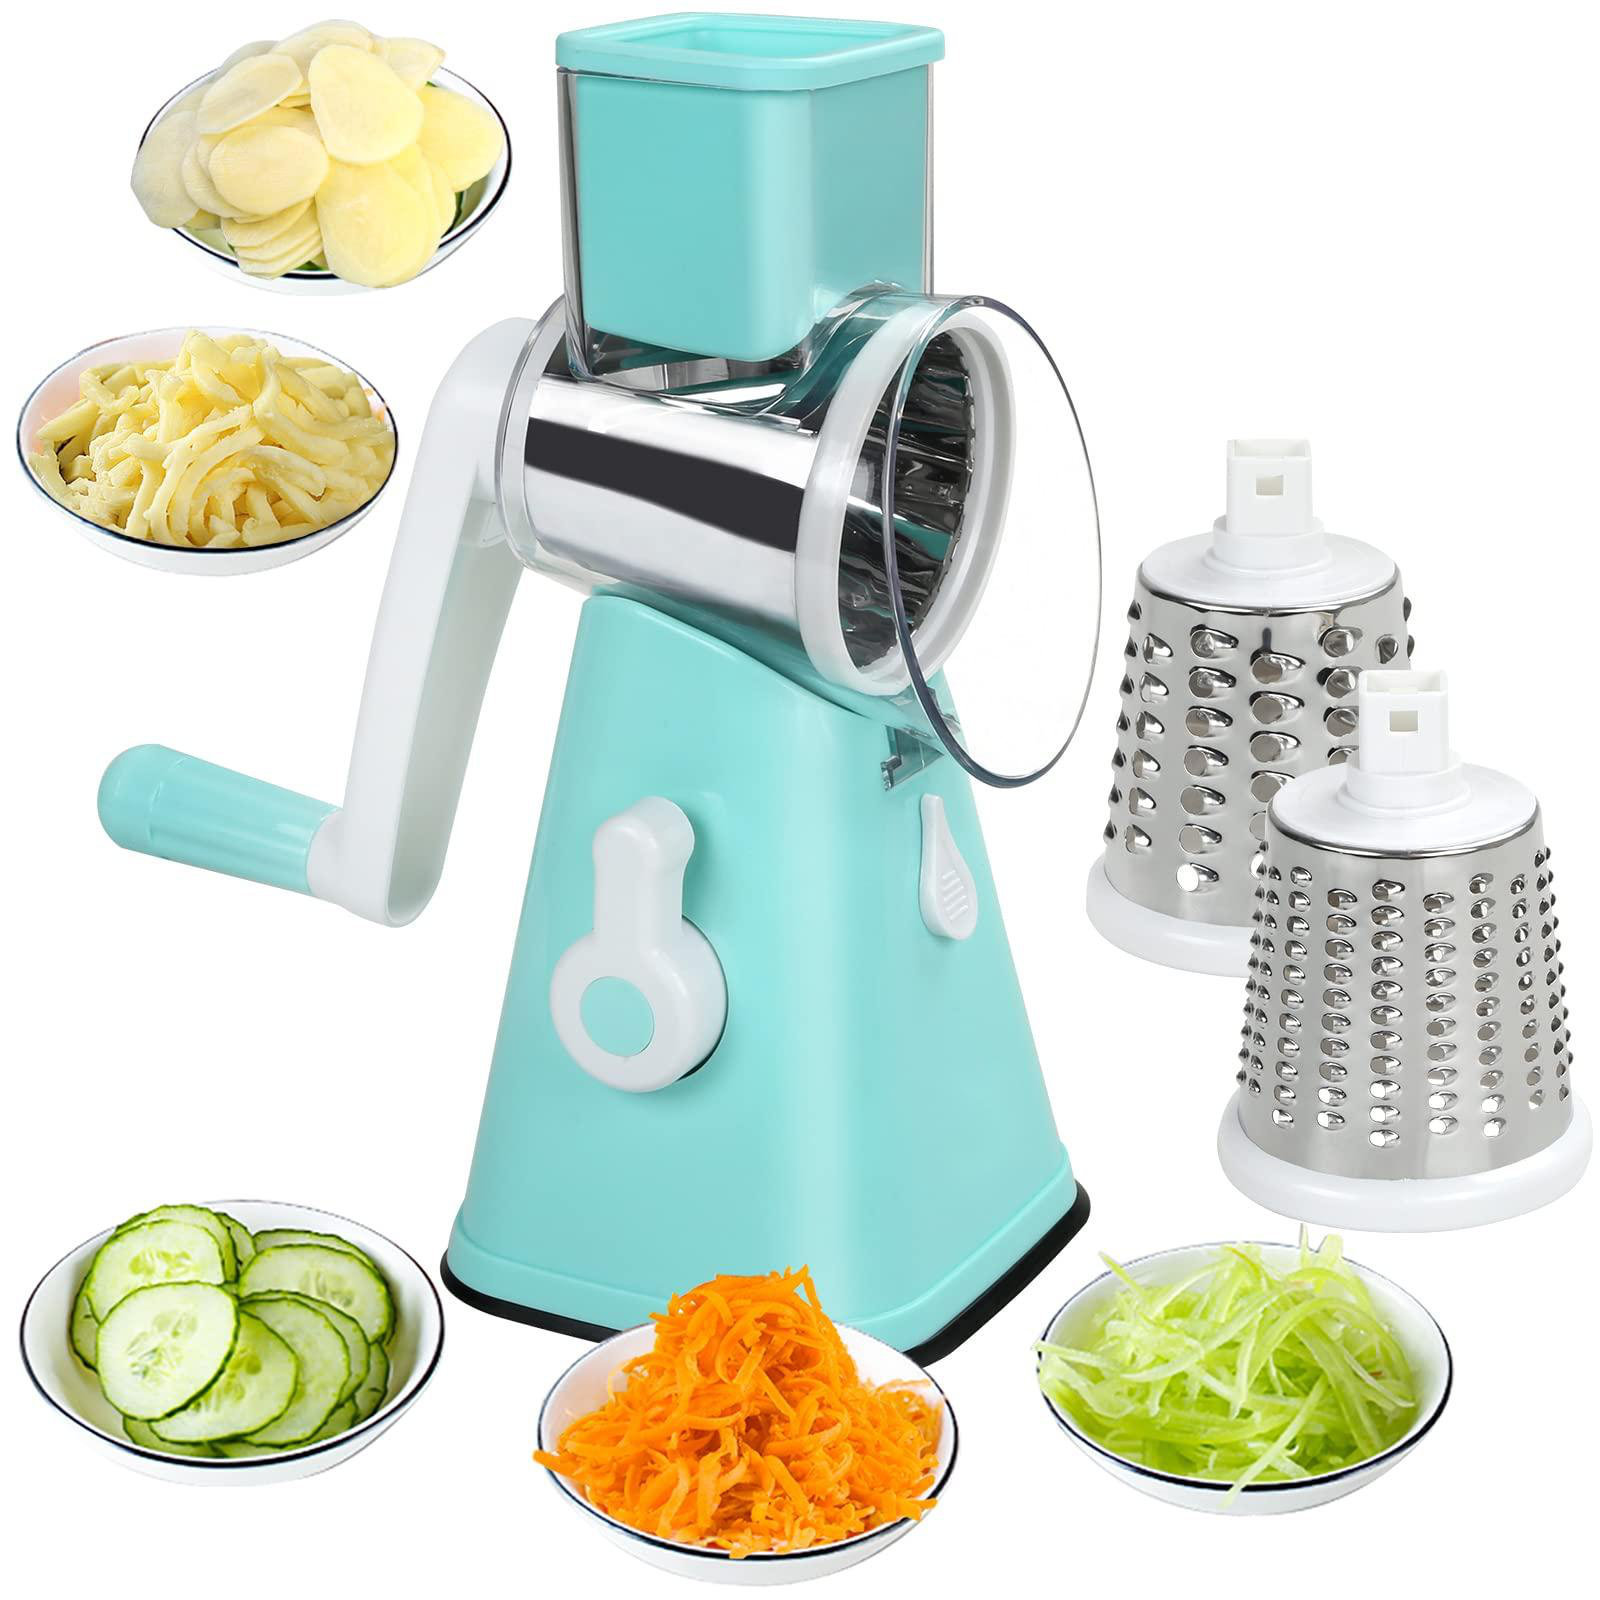 Himimi Electric Vegetable Graters Professional Salad Maker, Electric Slicer  Shredder Graters For Cheese, Carrot, Potato, Cucumbers & Reviews